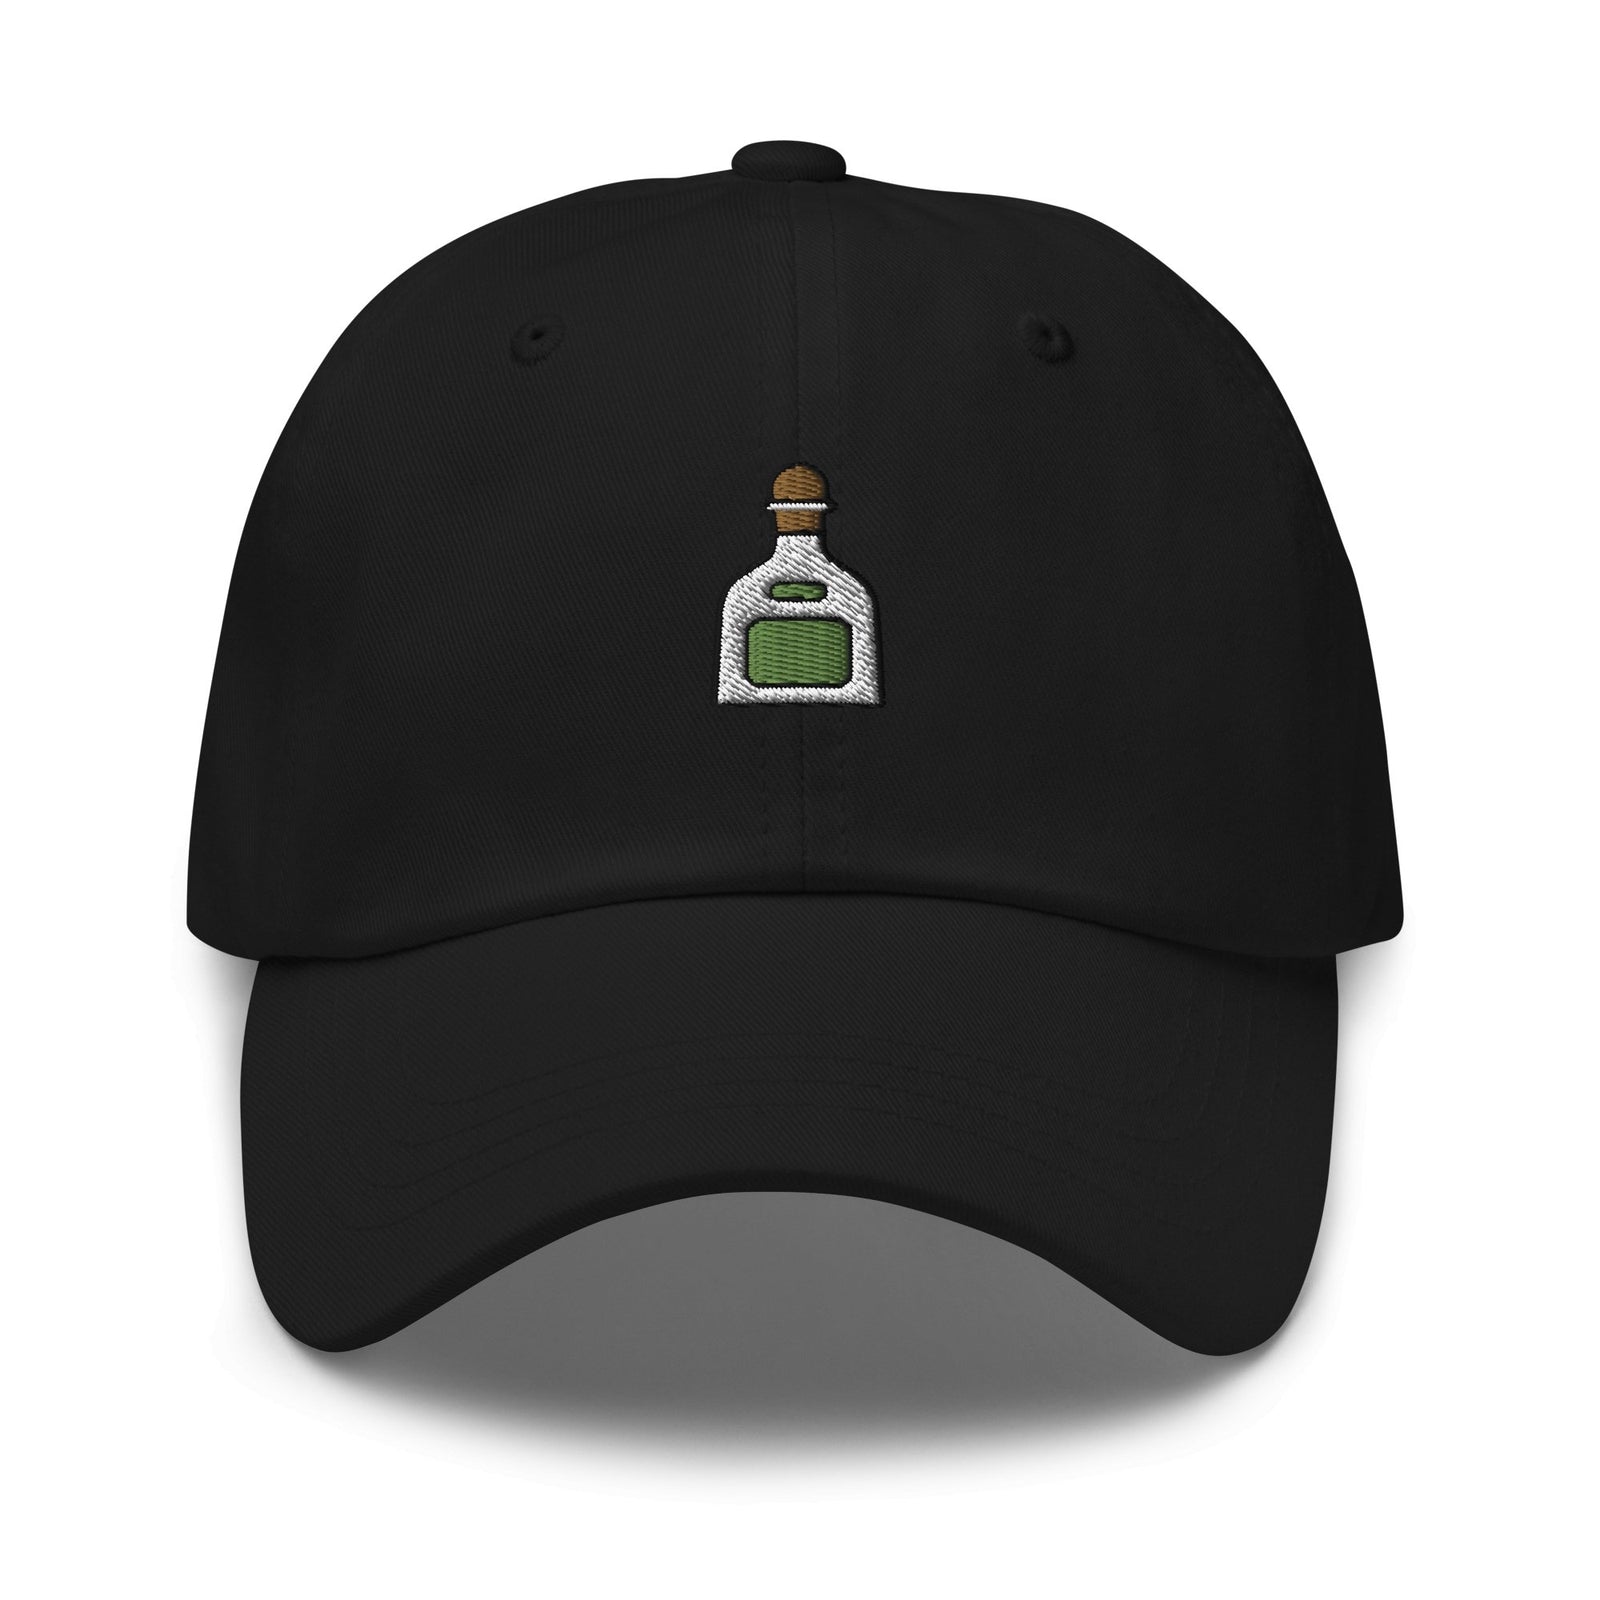 //cdn.shopify.com/s/files/1/0274/2488/2766/products/tequila-bottle-dad-hat-612172_5000x.jpg?v=1652422639 5000w,
    //cdn.shopify.com/s/files/1/0274/2488/2766/products/tequila-bottle-dad-hat-612172_4500x.jpg?v=1652422639 4500w,
    //cdn.shopify.com/s/files/1/0274/2488/2766/products/tequila-bottle-dad-hat-612172_4000x.jpg?v=1652422639 4000w,
    //cdn.shopify.com/s/files/1/0274/2488/2766/products/tequila-bottle-dad-hat-612172_3500x.jpg?v=1652422639 3500w,
    //cdn.shopify.com/s/files/1/0274/2488/2766/products/tequila-bottle-dad-hat-612172_3000x.jpg?v=1652422639 3000w,
    //cdn.shopify.com/s/files/1/0274/2488/2766/products/tequila-bottle-dad-hat-612172_2500x.jpg?v=1652422639 2500w,
    //cdn.shopify.com/s/files/1/0274/2488/2766/products/tequila-bottle-dad-hat-612172_2000x.jpg?v=1652422639 2000w,
    //cdn.shopify.com/s/files/1/0274/2488/2766/products/tequila-bottle-dad-hat-612172_1800x.jpg?v=1652422639 1800w,
    //cdn.shopify.com/s/files/1/0274/2488/2766/products/tequila-bottle-dad-hat-612172_1600x.jpg?v=1652422639 1600w,
    //cdn.shopify.com/s/files/1/0274/2488/2766/products/tequila-bottle-dad-hat-612172_1400x.jpg?v=1652422639 1400w,
    //cdn.shopify.com/s/files/1/0274/2488/2766/products/tequila-bottle-dad-hat-612172_1200x.jpg?v=1652422639 1200w,
    //cdn.shopify.com/s/files/1/0274/2488/2766/products/tequila-bottle-dad-hat-612172_1000x.jpg?v=1652422639 1000w,
    //cdn.shopify.com/s/files/1/0274/2488/2766/products/tequila-bottle-dad-hat-612172_800x.jpg?v=1652422639 800w,
    //cdn.shopify.com/s/files/1/0274/2488/2766/products/tequila-bottle-dad-hat-612172_600x.jpg?v=1652422639 600w,
    //cdn.shopify.com/s/files/1/0274/2488/2766/products/tequila-bottle-dad-hat-612172_400x.jpg?v=1652422639 400w,
    //cdn.shopify.com/s/files/1/0274/2488/2766/products/tequila-bottle-dad-hat-612172_200x.jpg?v=1652422639 200w